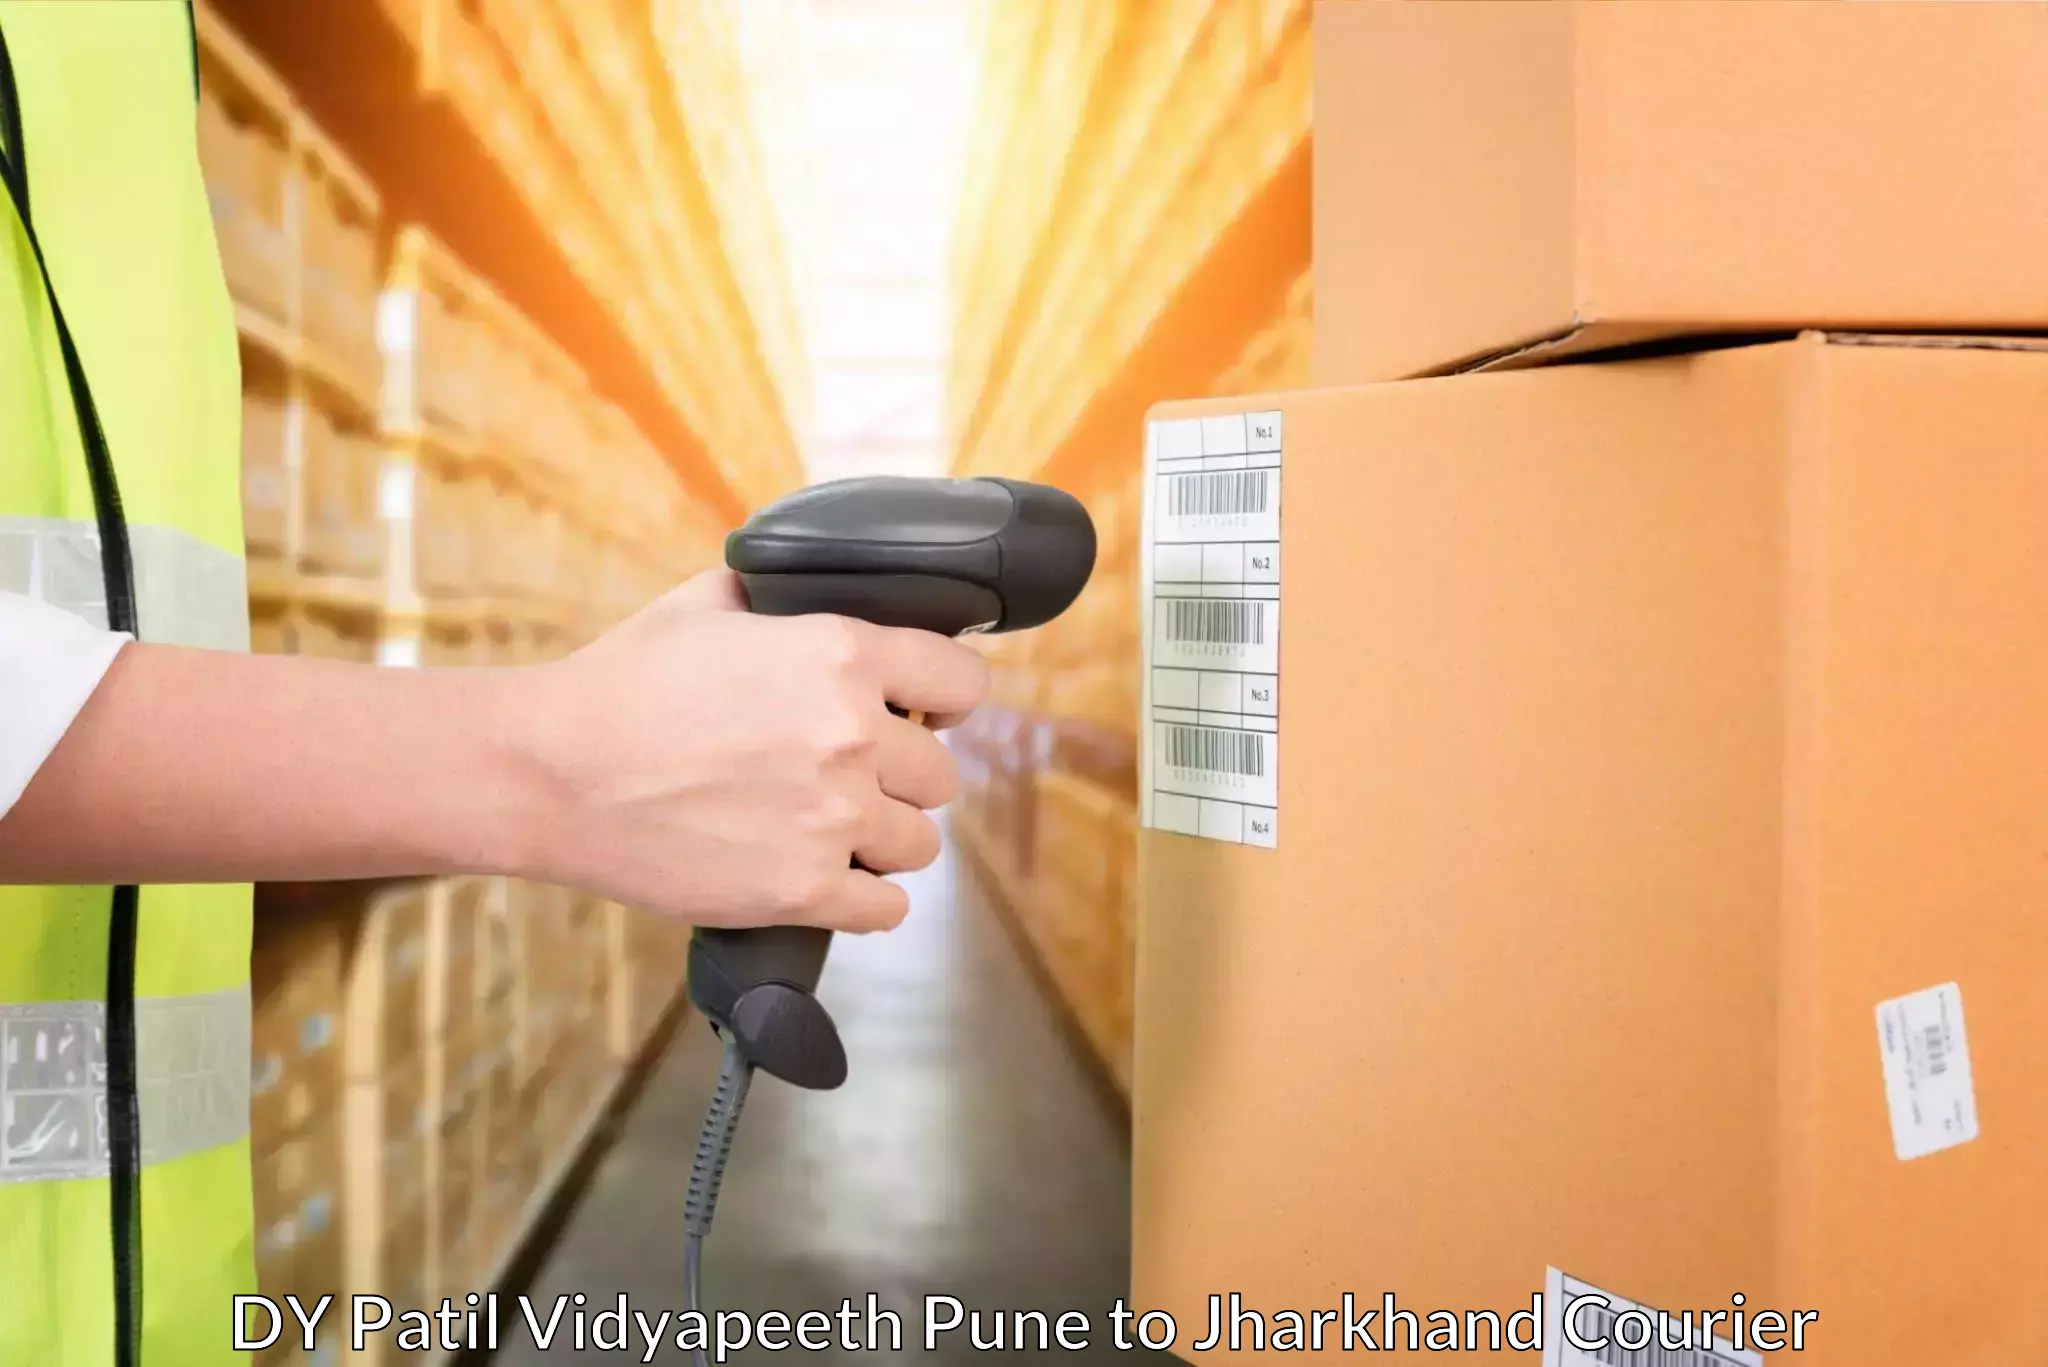 Cargo courier service DY Patil Vidyapeeth Pune to Peterbar